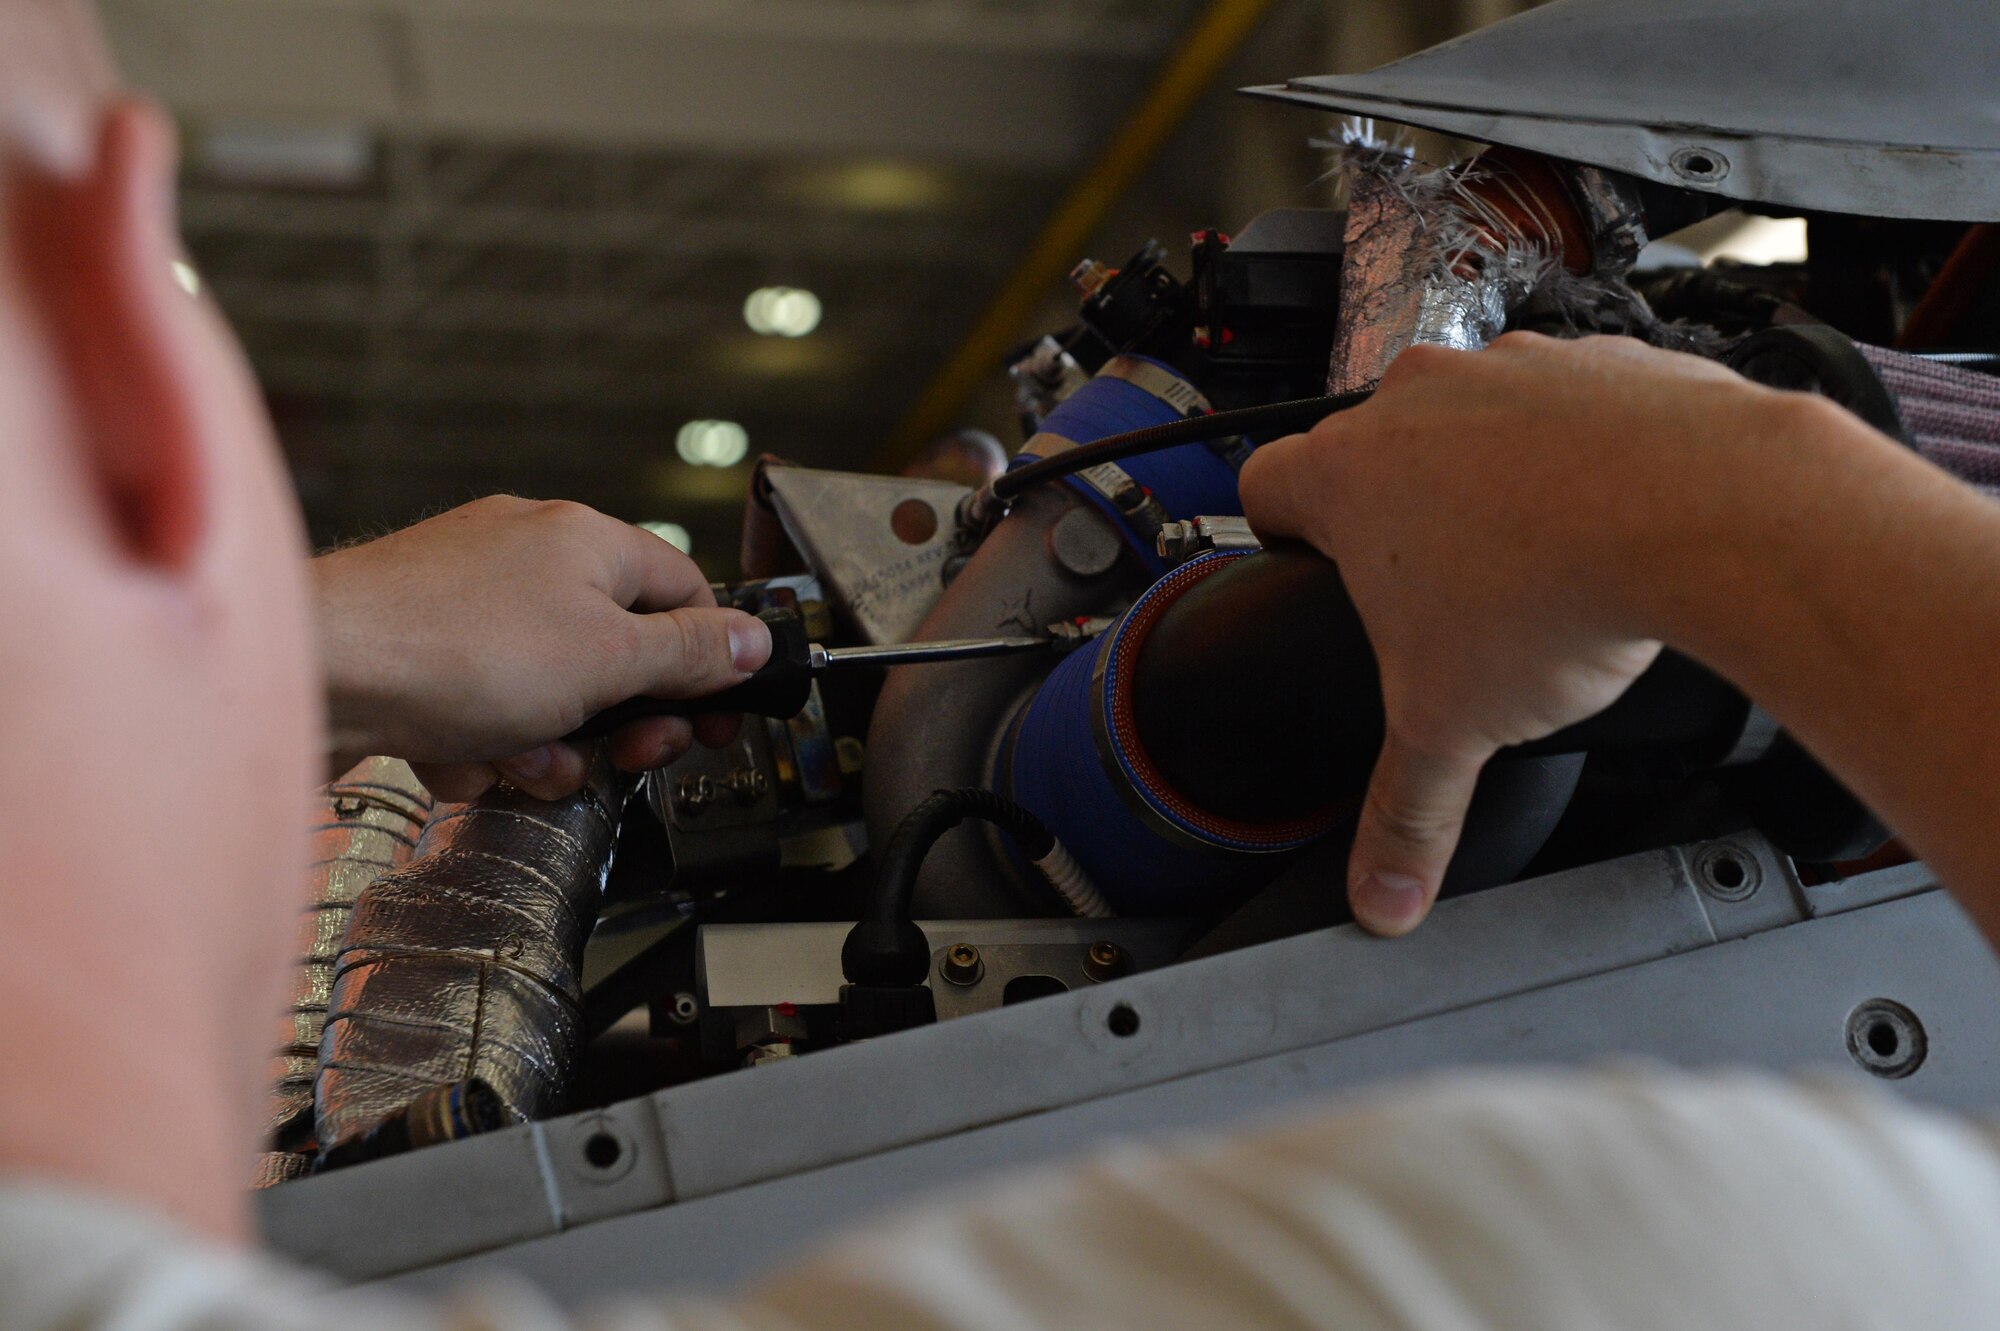 A 432nd Aircraft Maintenance Squadron crew chief fastens a bolt on an MQ-1 Predator June 10, 2016, at Creech Air Force Base, Nevada. The 432nd AMXS crew chiefs provide maintenance support to more than 40 MQ-1 and MQ-9 Reapers used by aircrews in global operations 24/7/365. (U.S. Air Force photo by Airman 1st Class Kristan Campbell/Released).